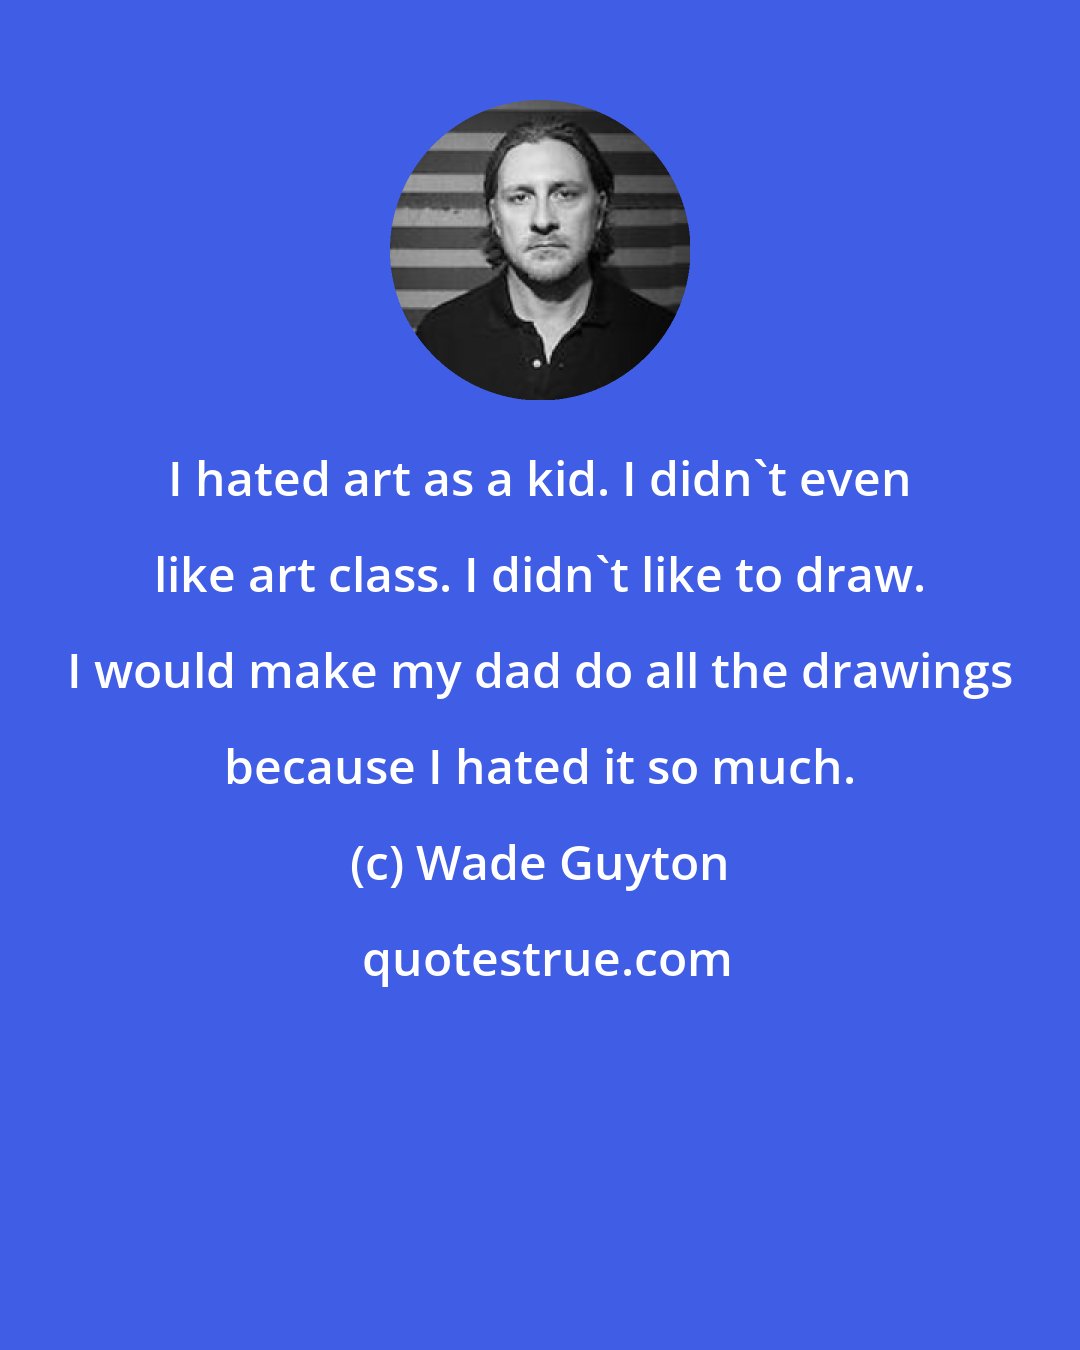 Wade Guyton: I hated art as a kid. I didn't even like art class. I didn't like to draw. I would make my dad do all the drawings because I hated it so much.